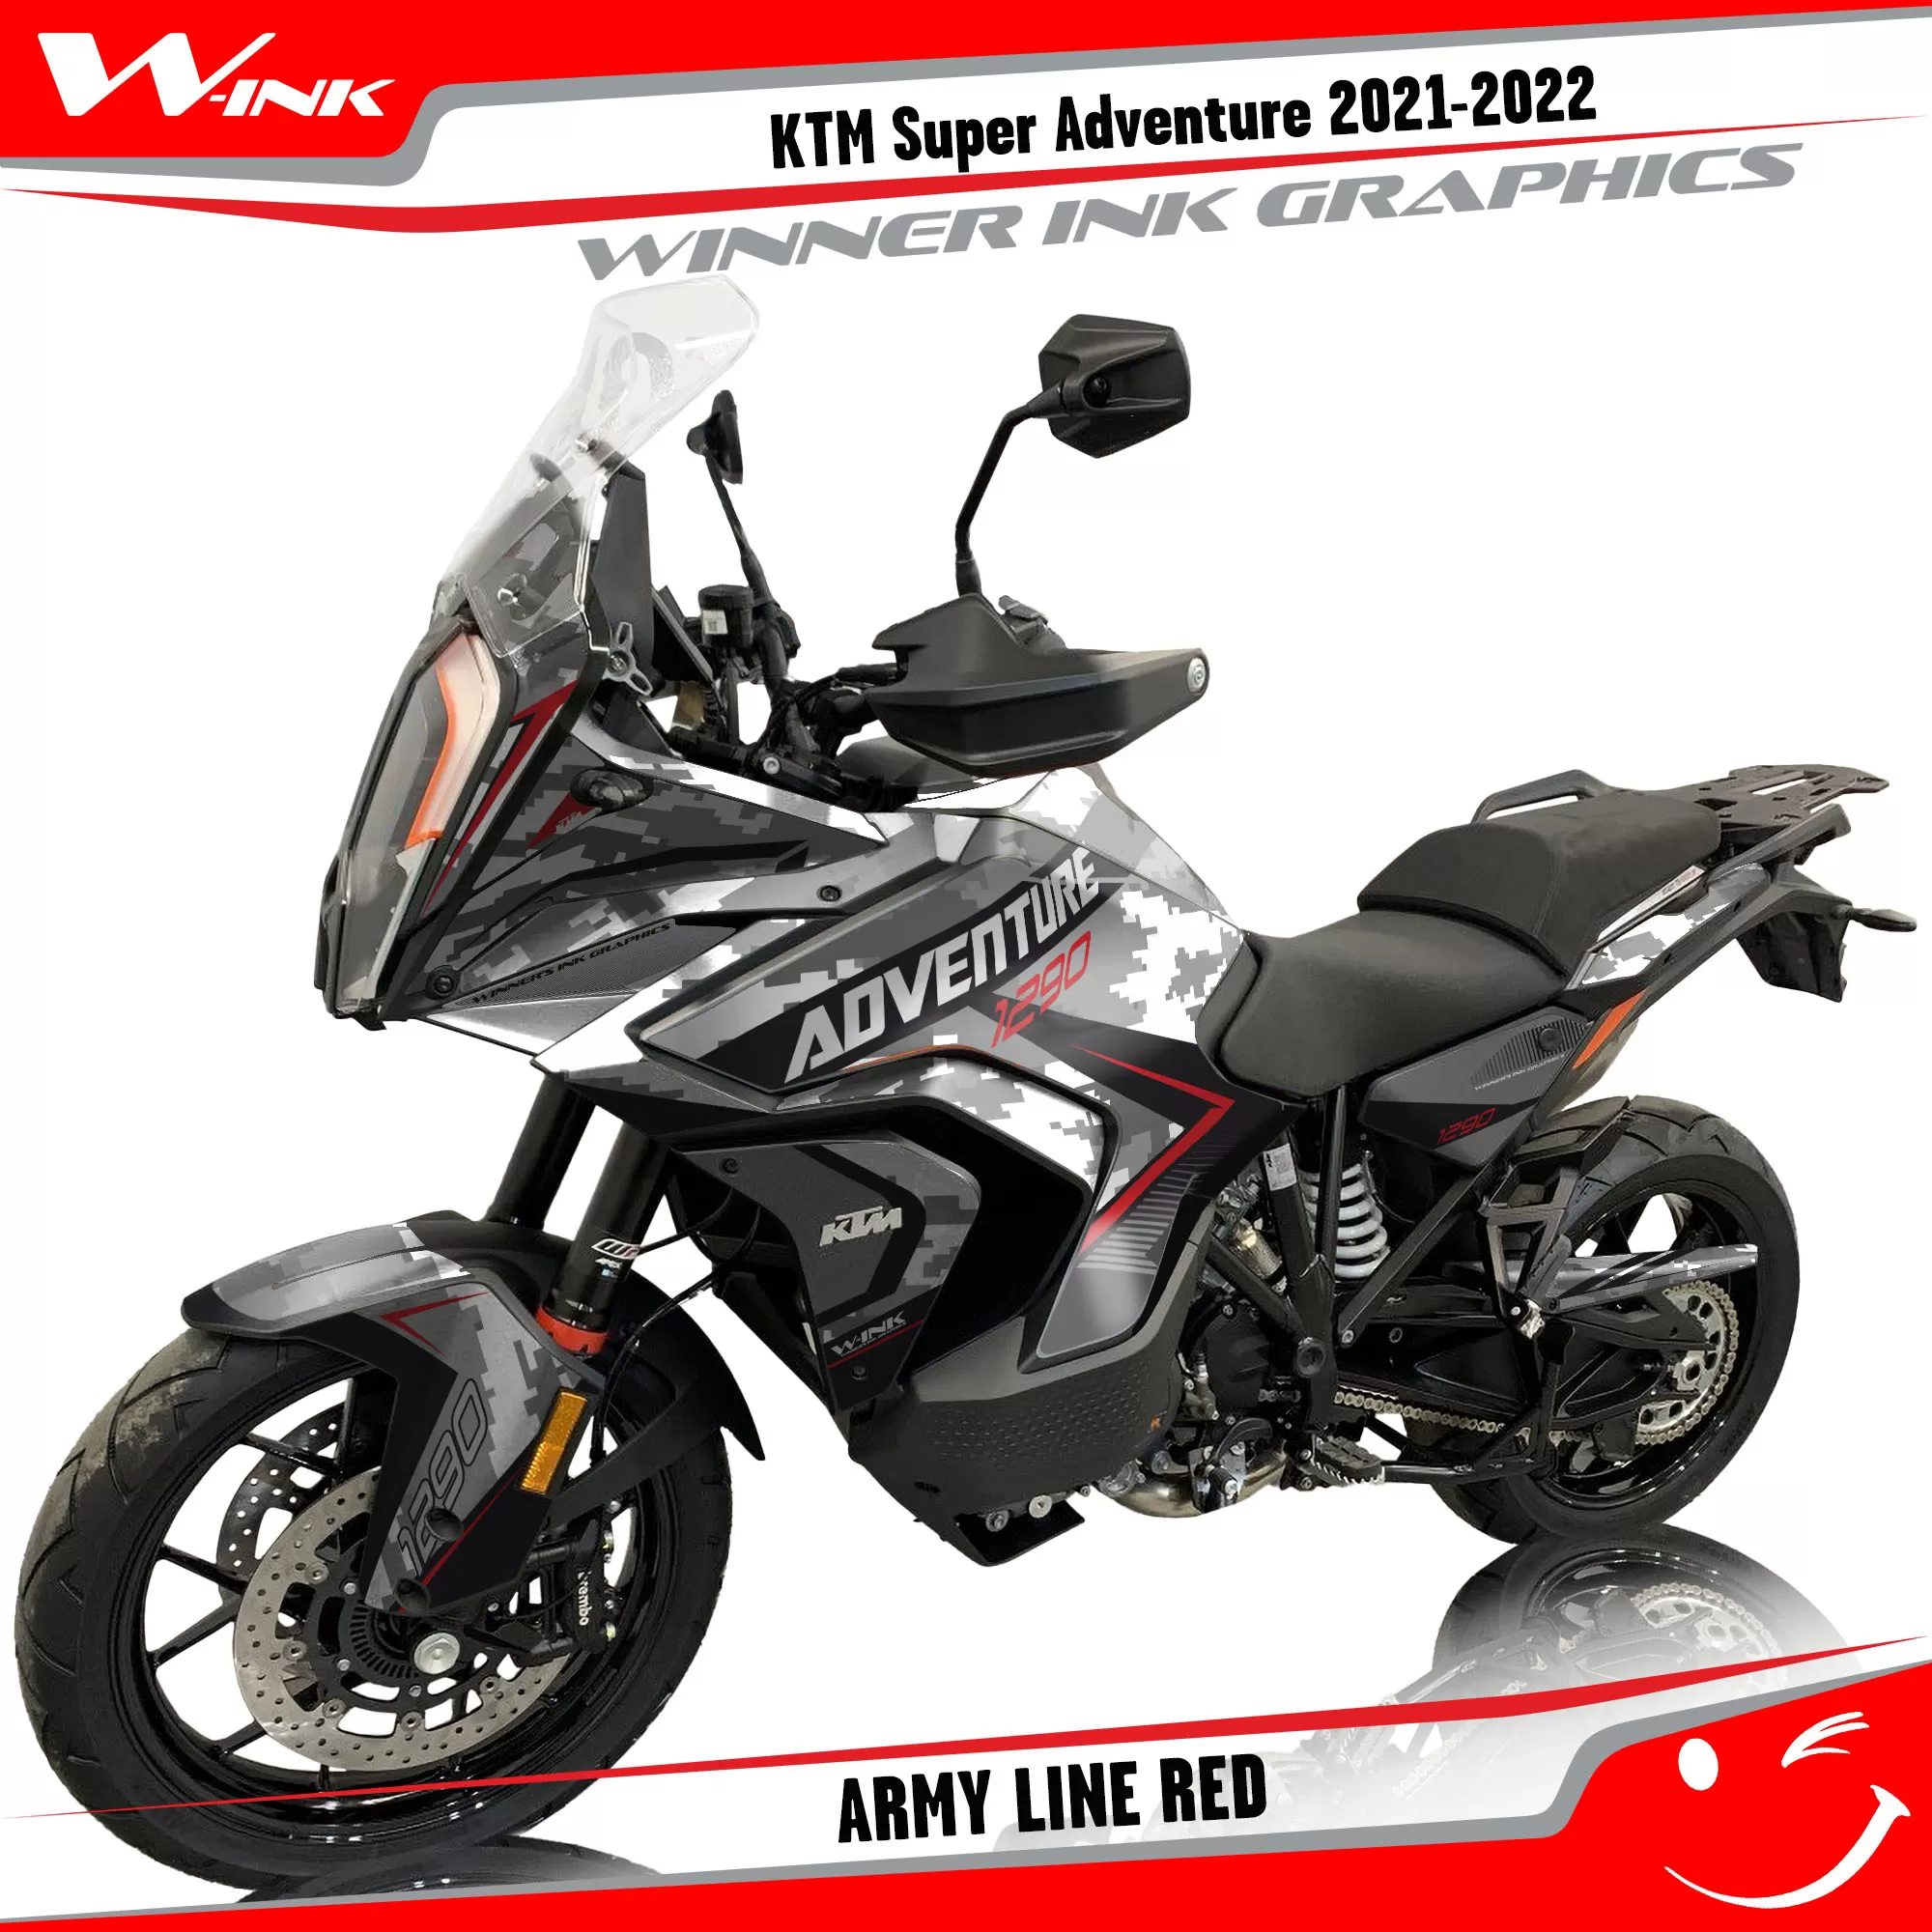 KTM-Super-Adventure-S-2021-2022-graphics-kit-and-decals-with-designs-Army-Line-Red